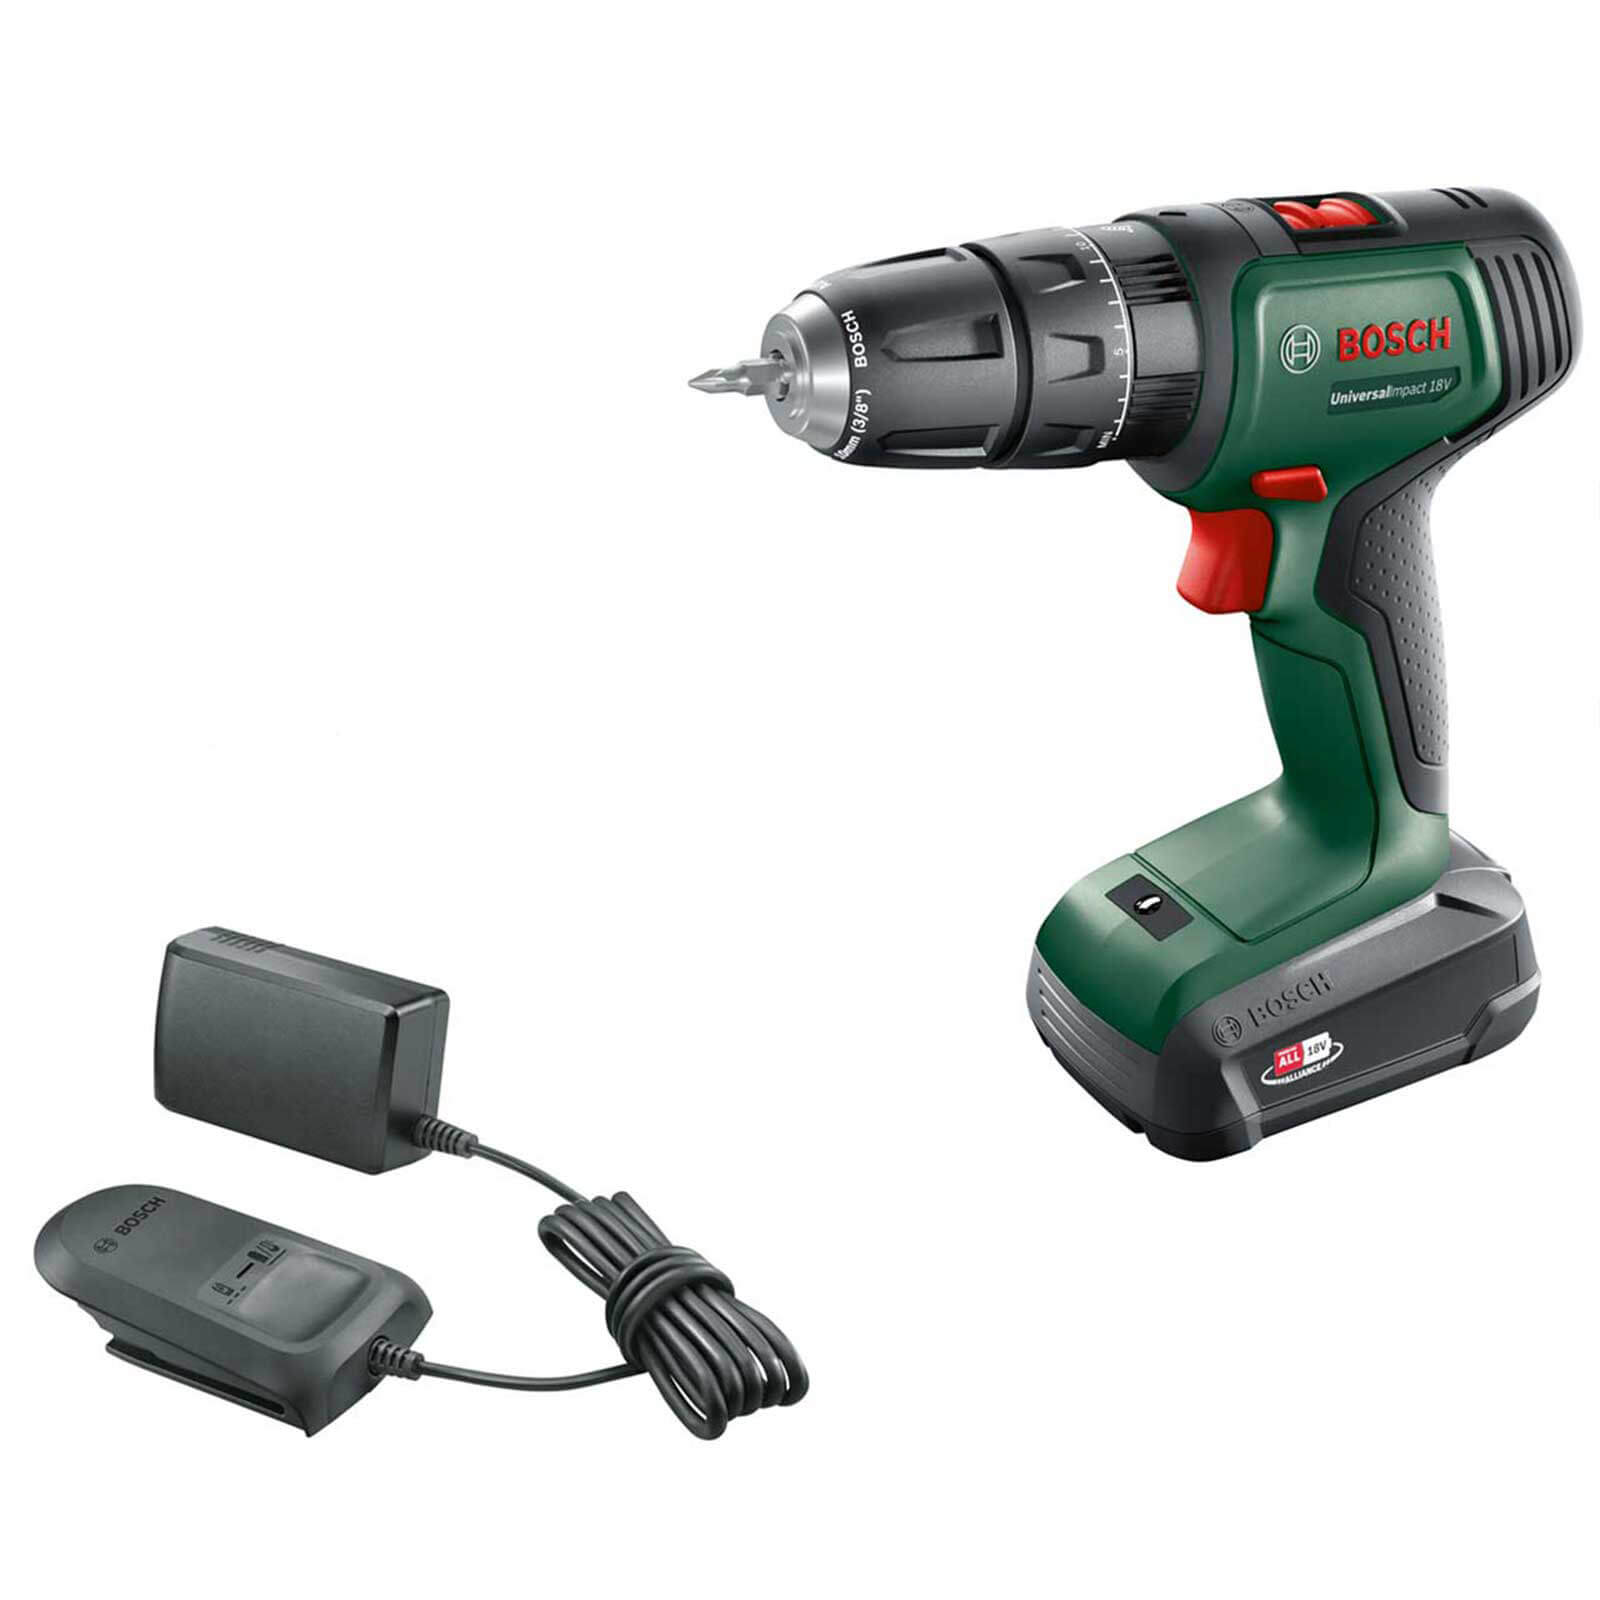 Image of Bosch UNIVERSALIMPACT 18v Cordless Combi Drill 1 x 2.5ah Li-ion Charger No Case